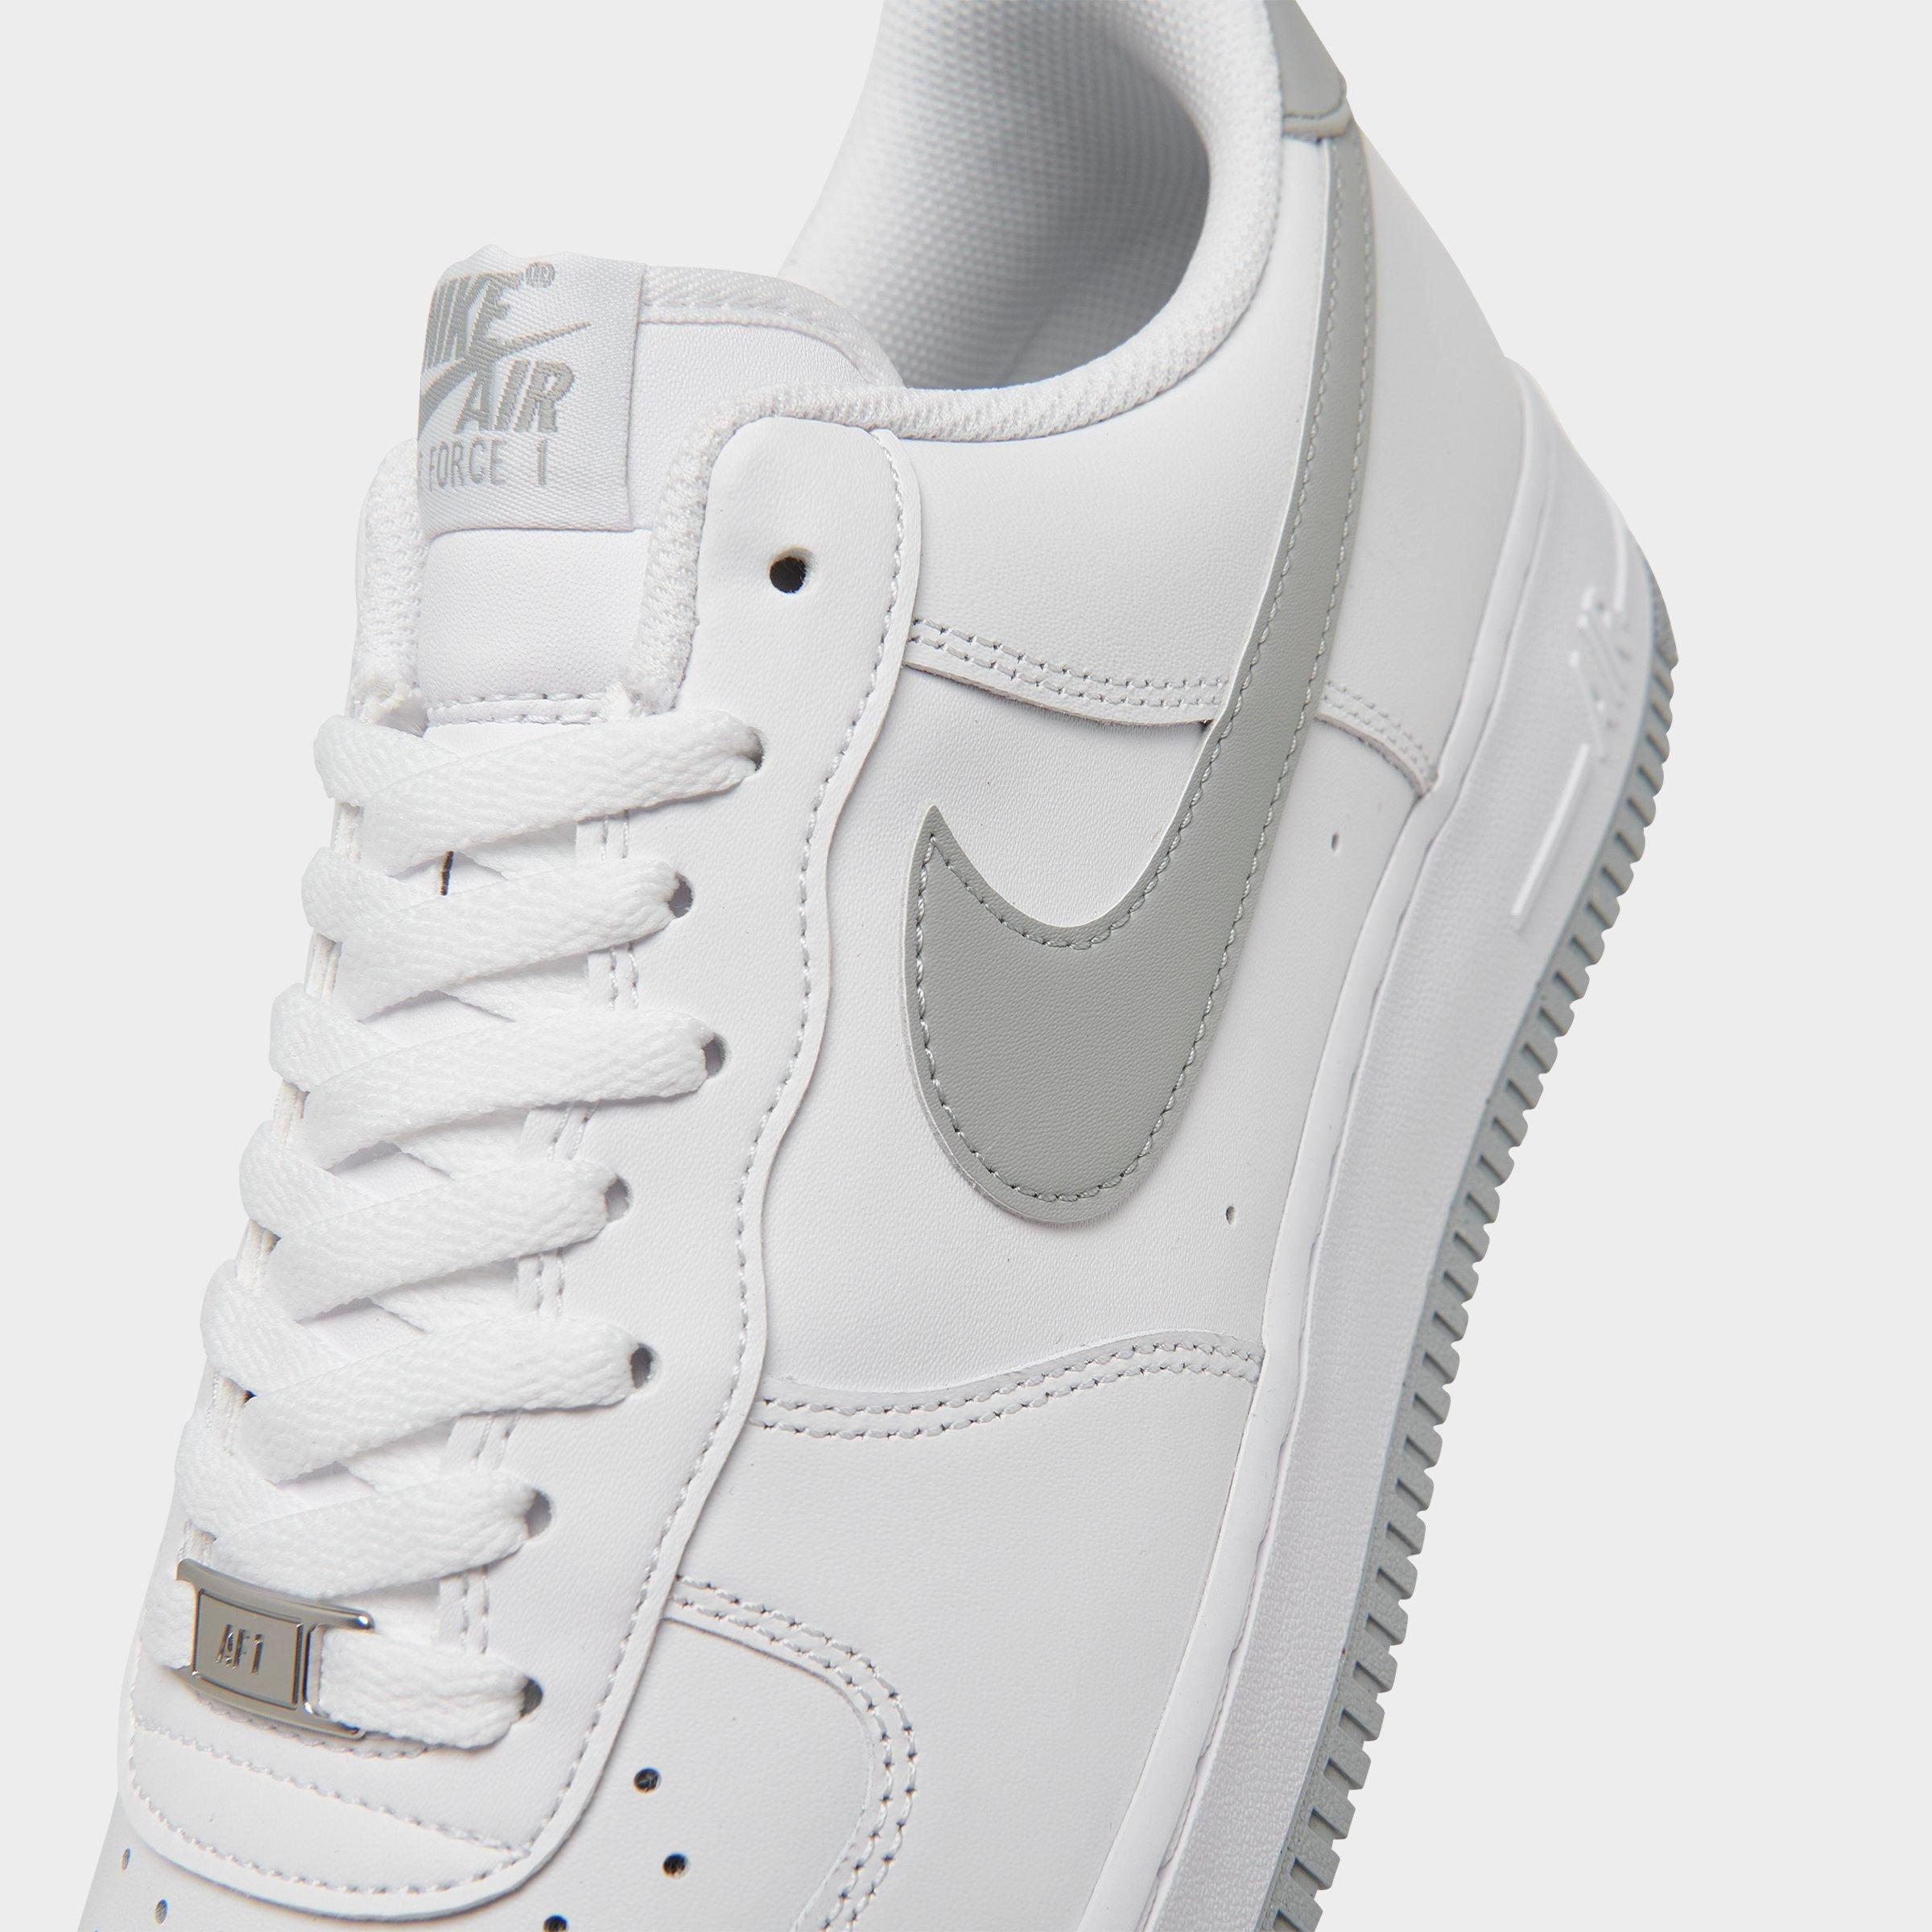 Men's Nike Air Force 1 '07 Casual Shoes | Finish Line